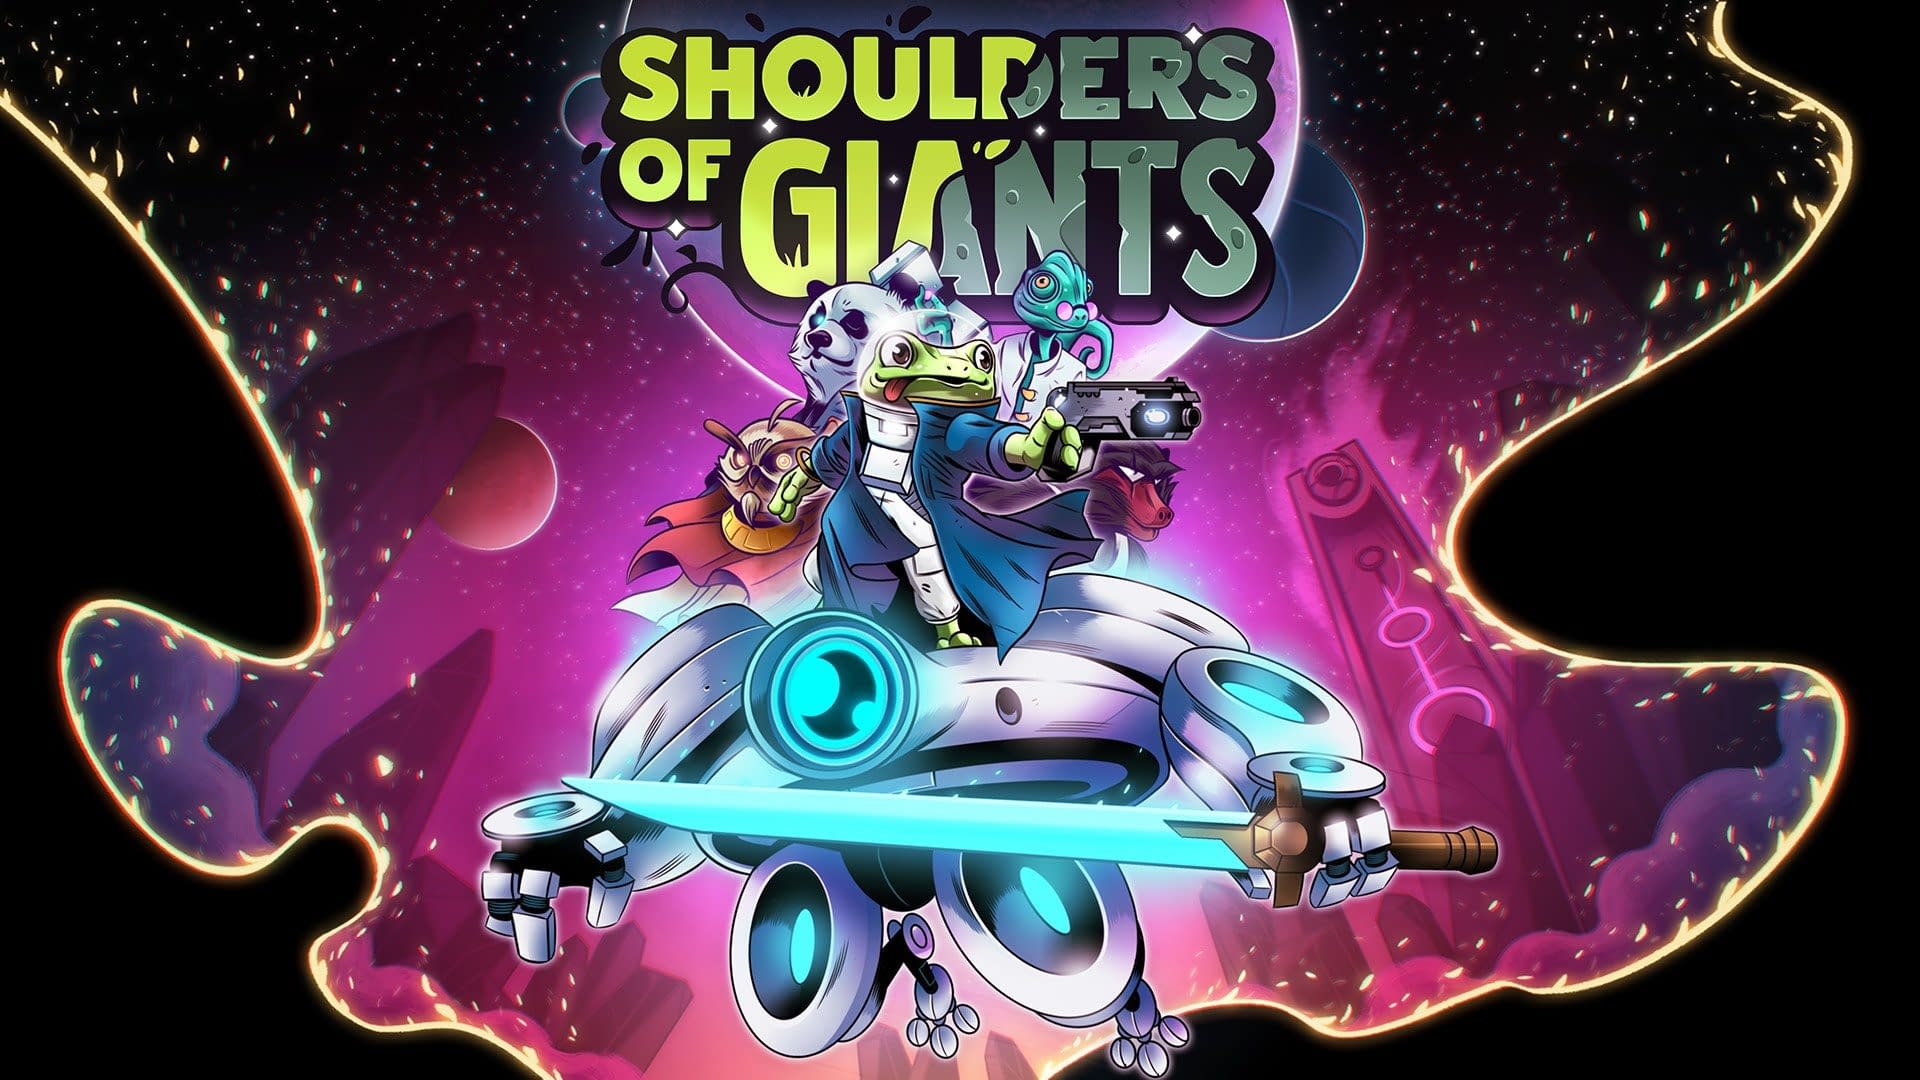 Action Adventure Game Shulders of Giants Released Date